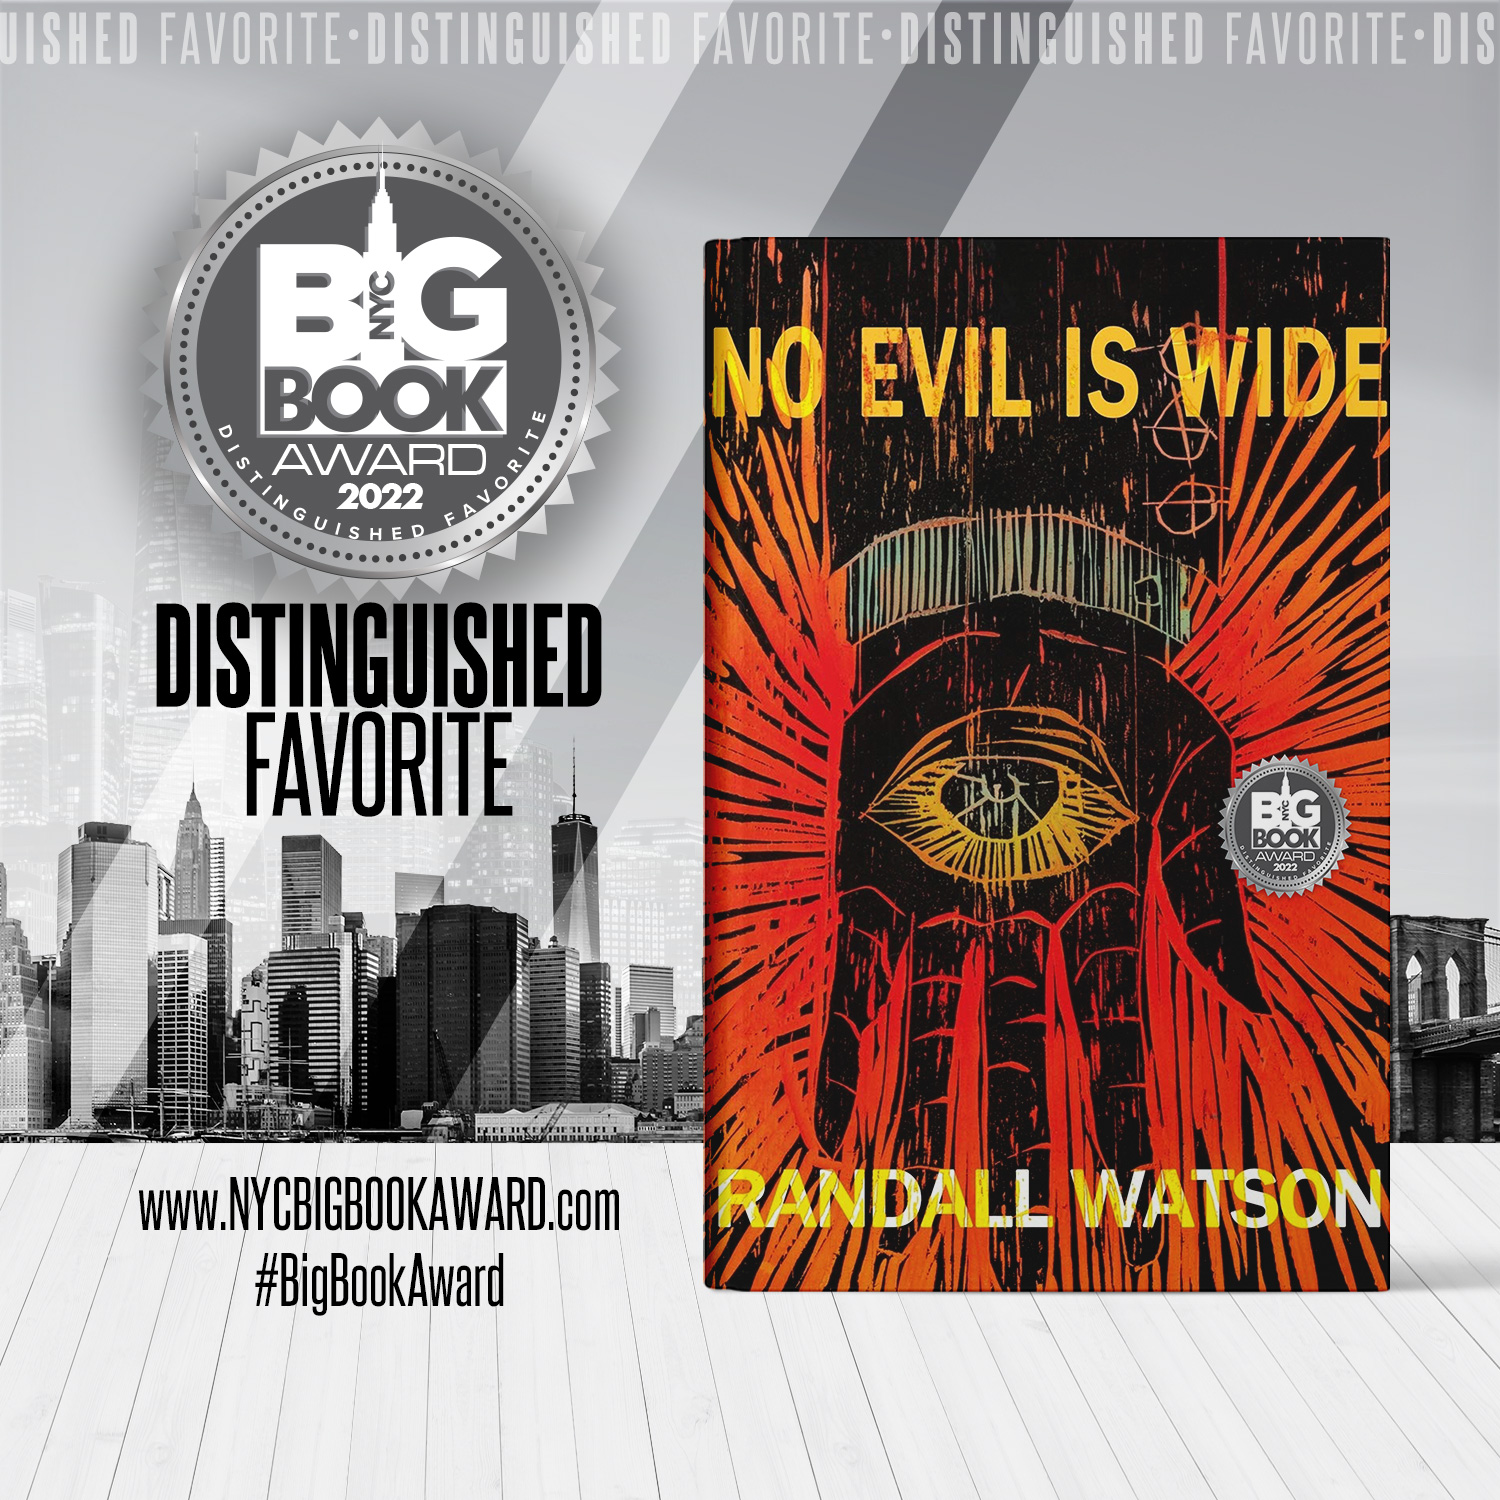 No Evil is Wide cover showing the medallion proclaiming the book a Big Book Award Distinguished Favorite for 2022. Red and black book cover on a black and white background of the NYC skyline